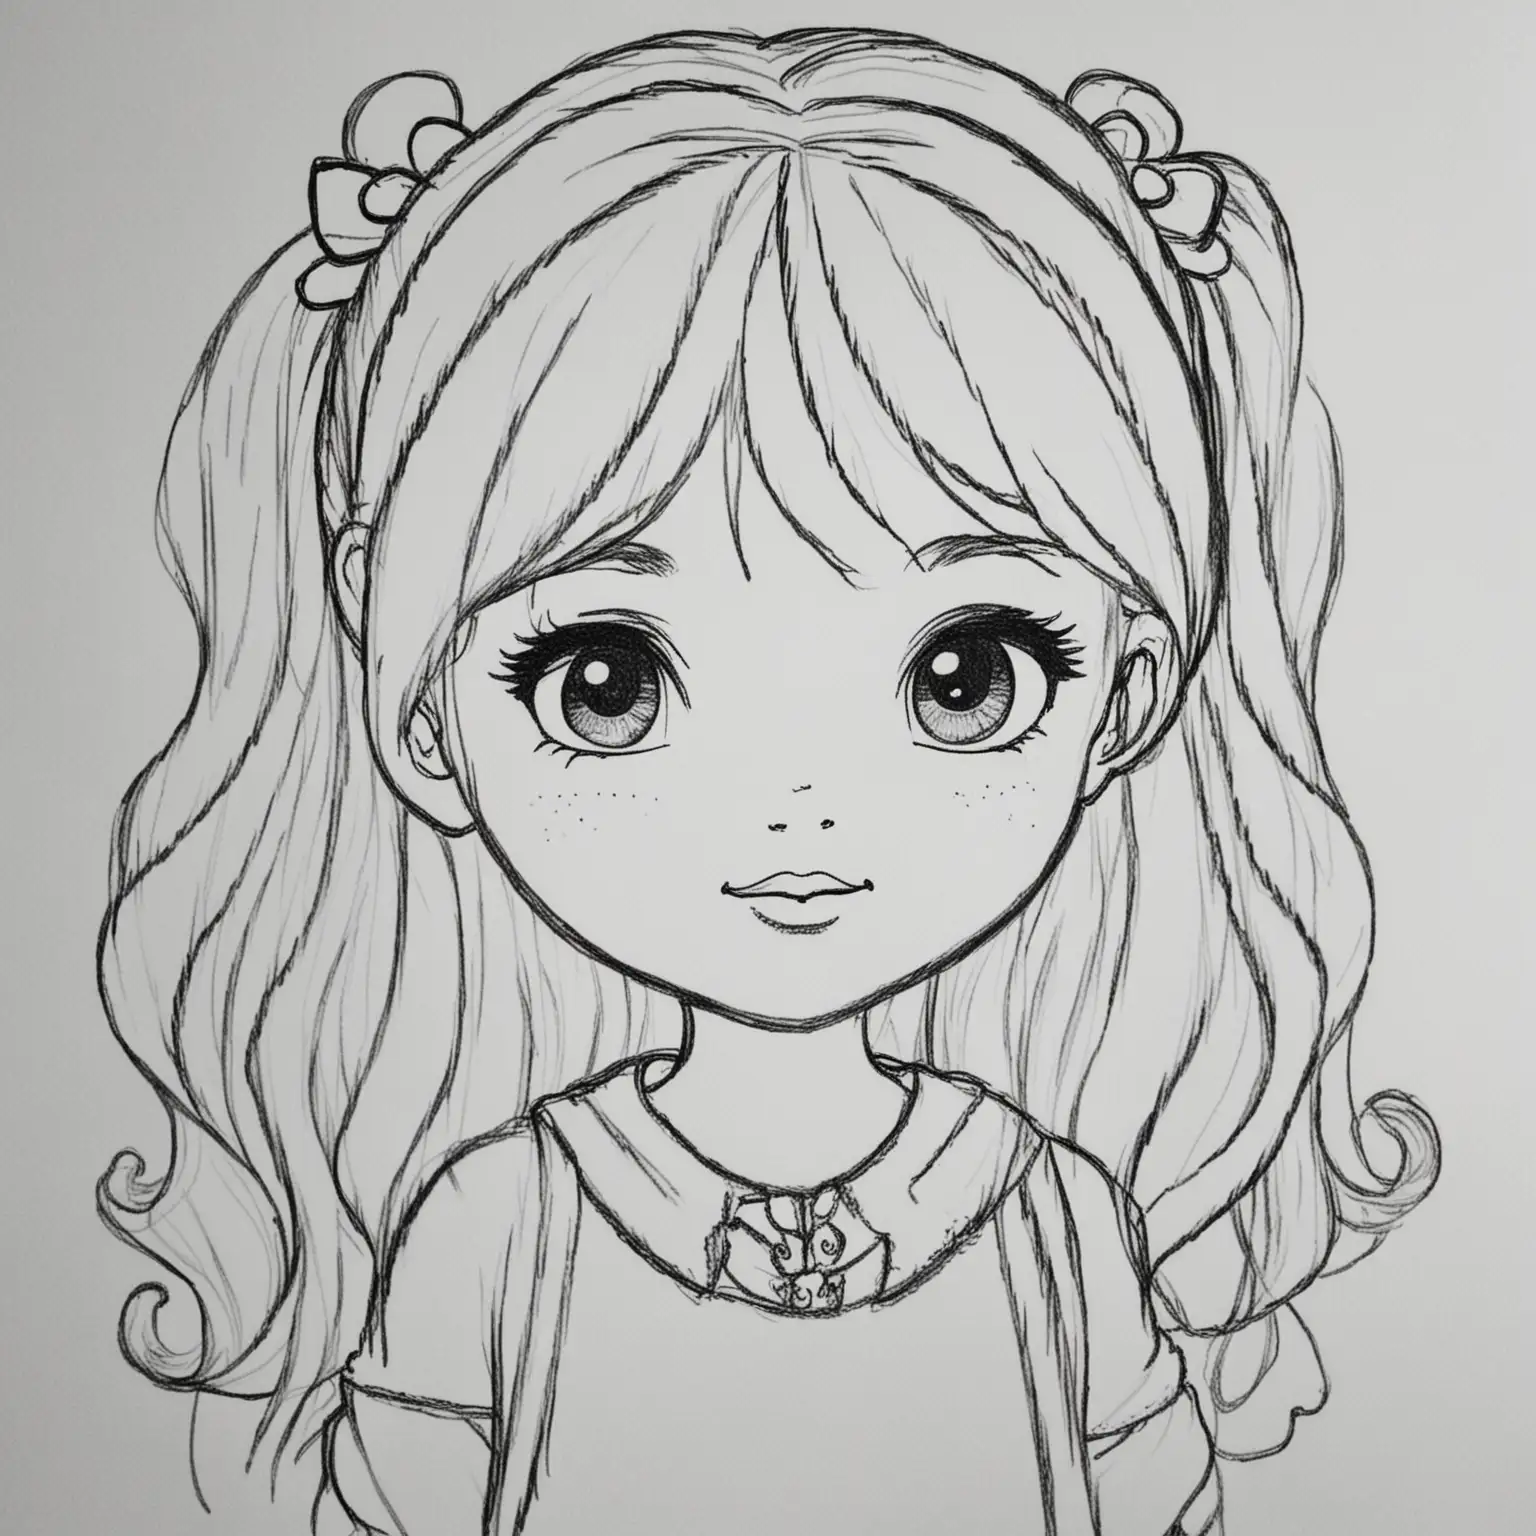 Creative Little Girl Coloring Pages Joyful Artistic Activity for Children